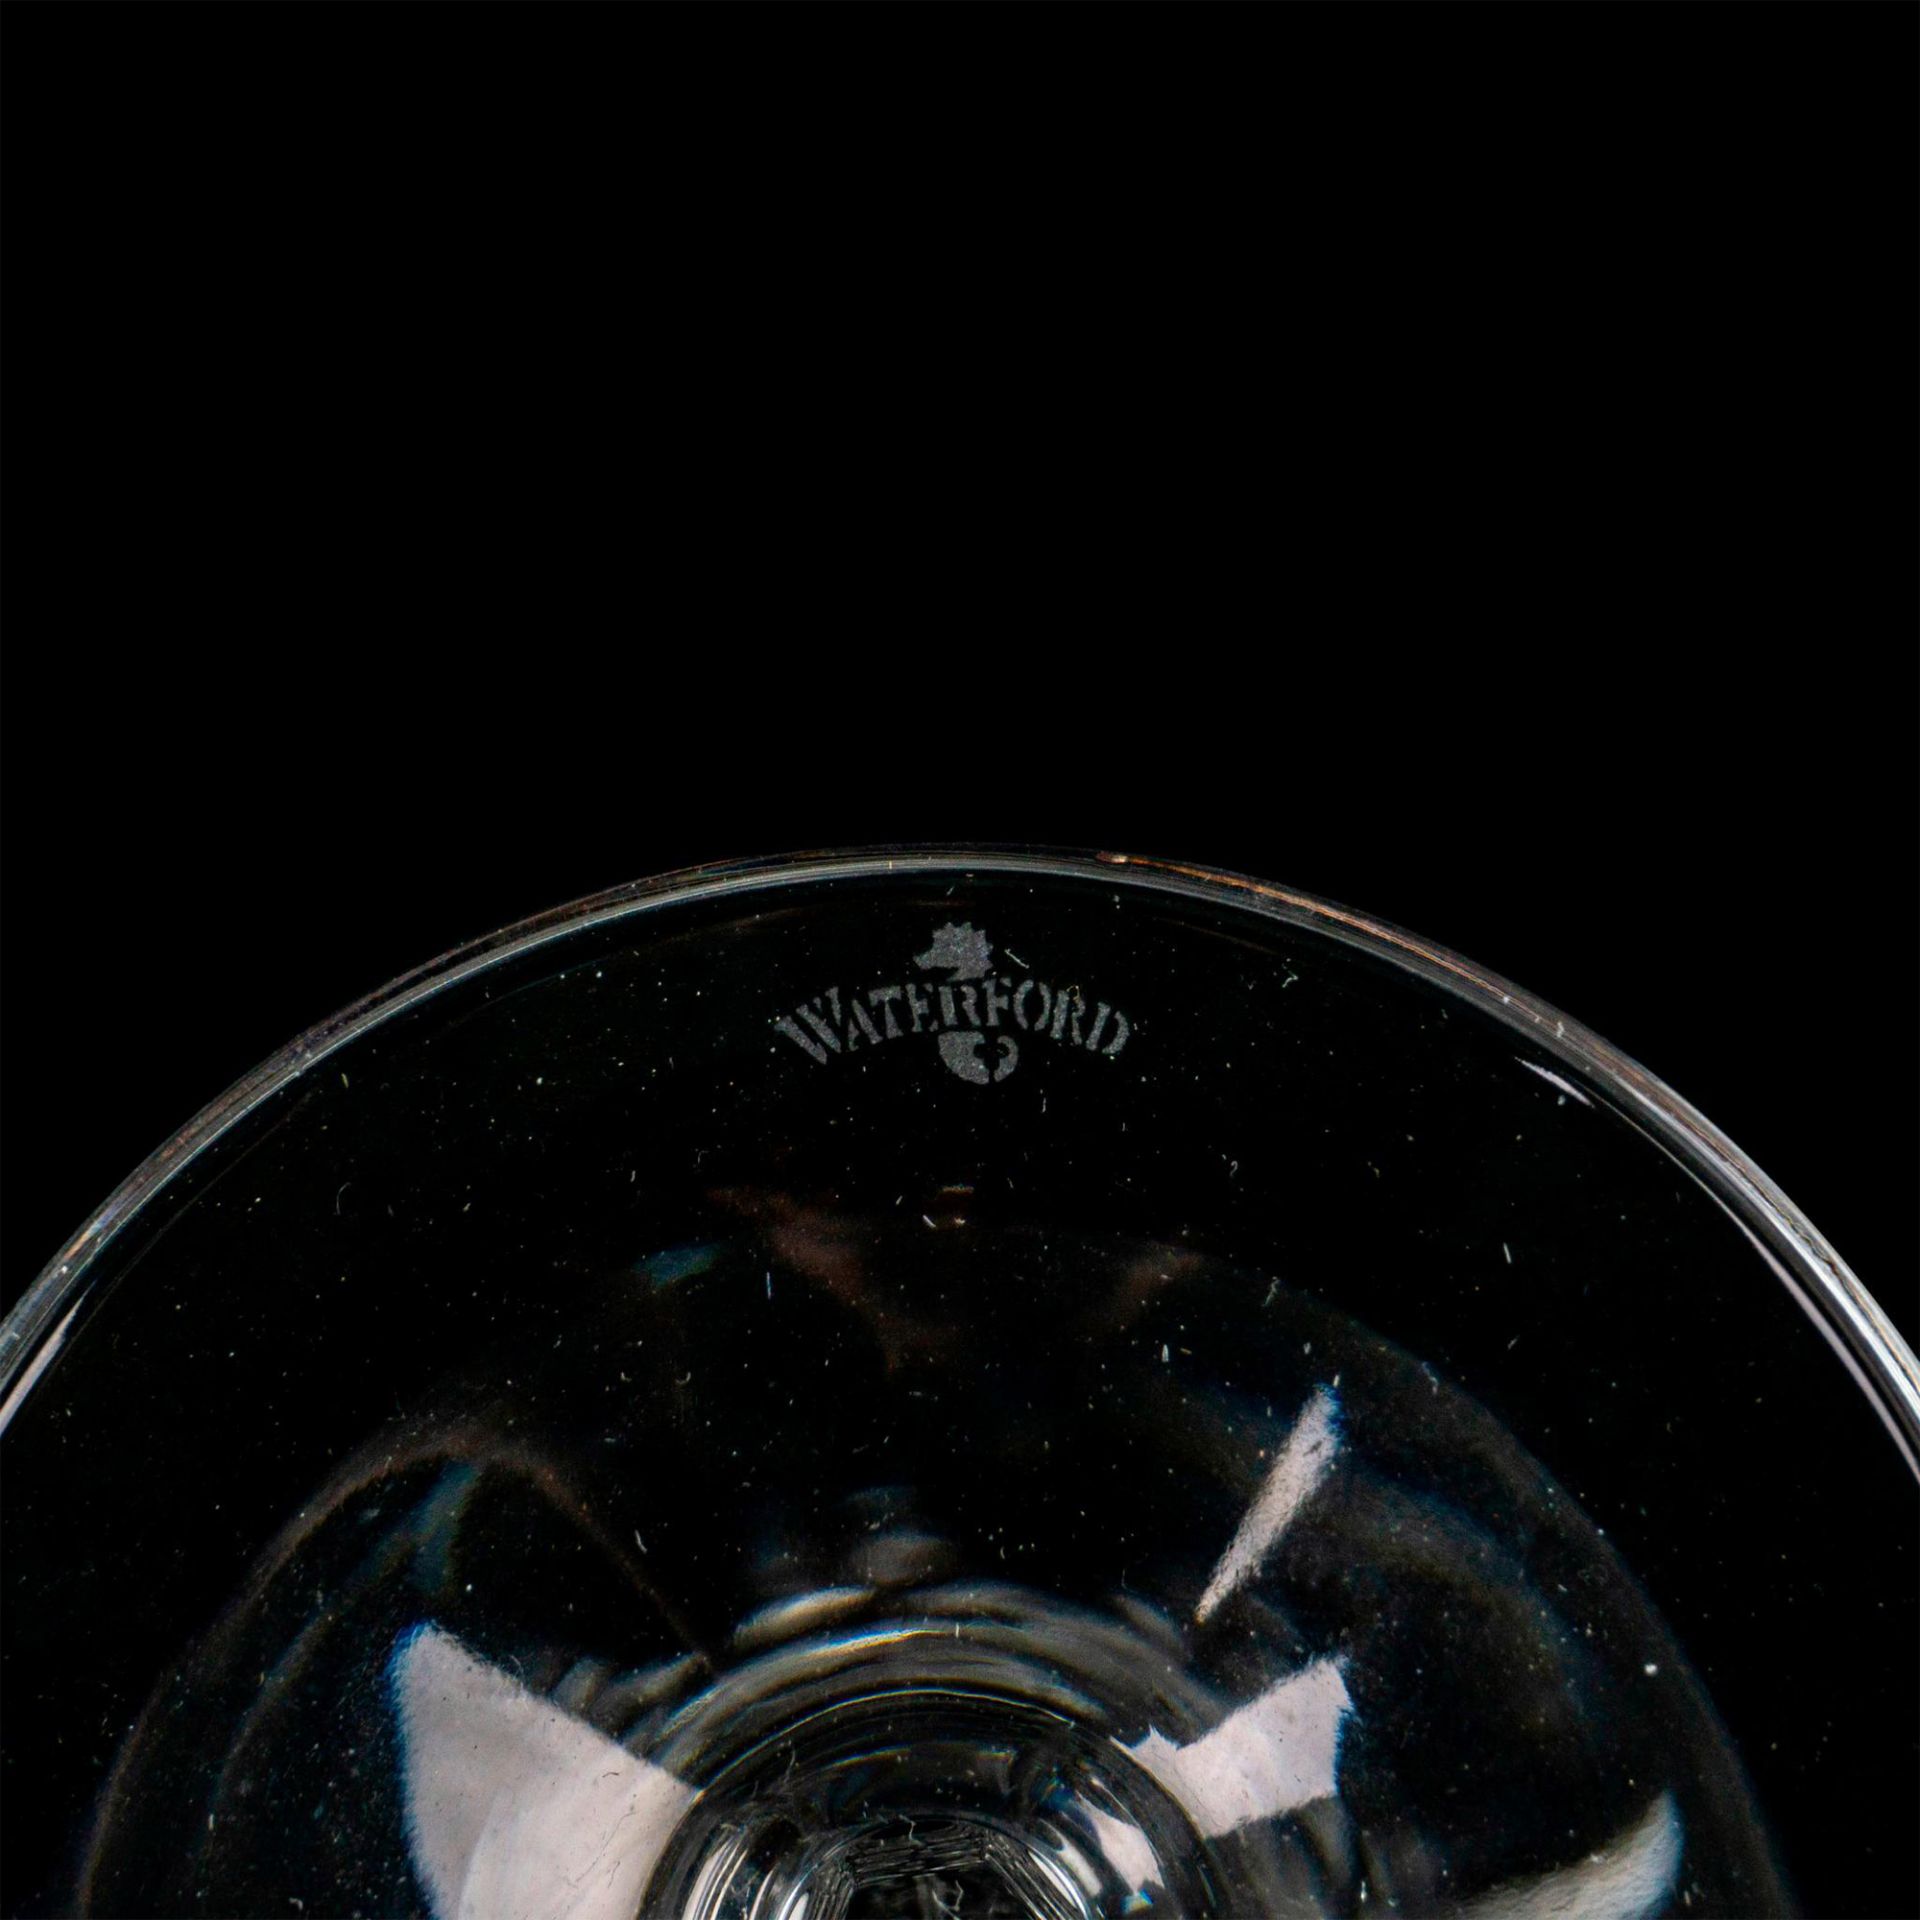 Pair of Waterford Crystal Champagne Glasses, Millenium - Image 3 of 3